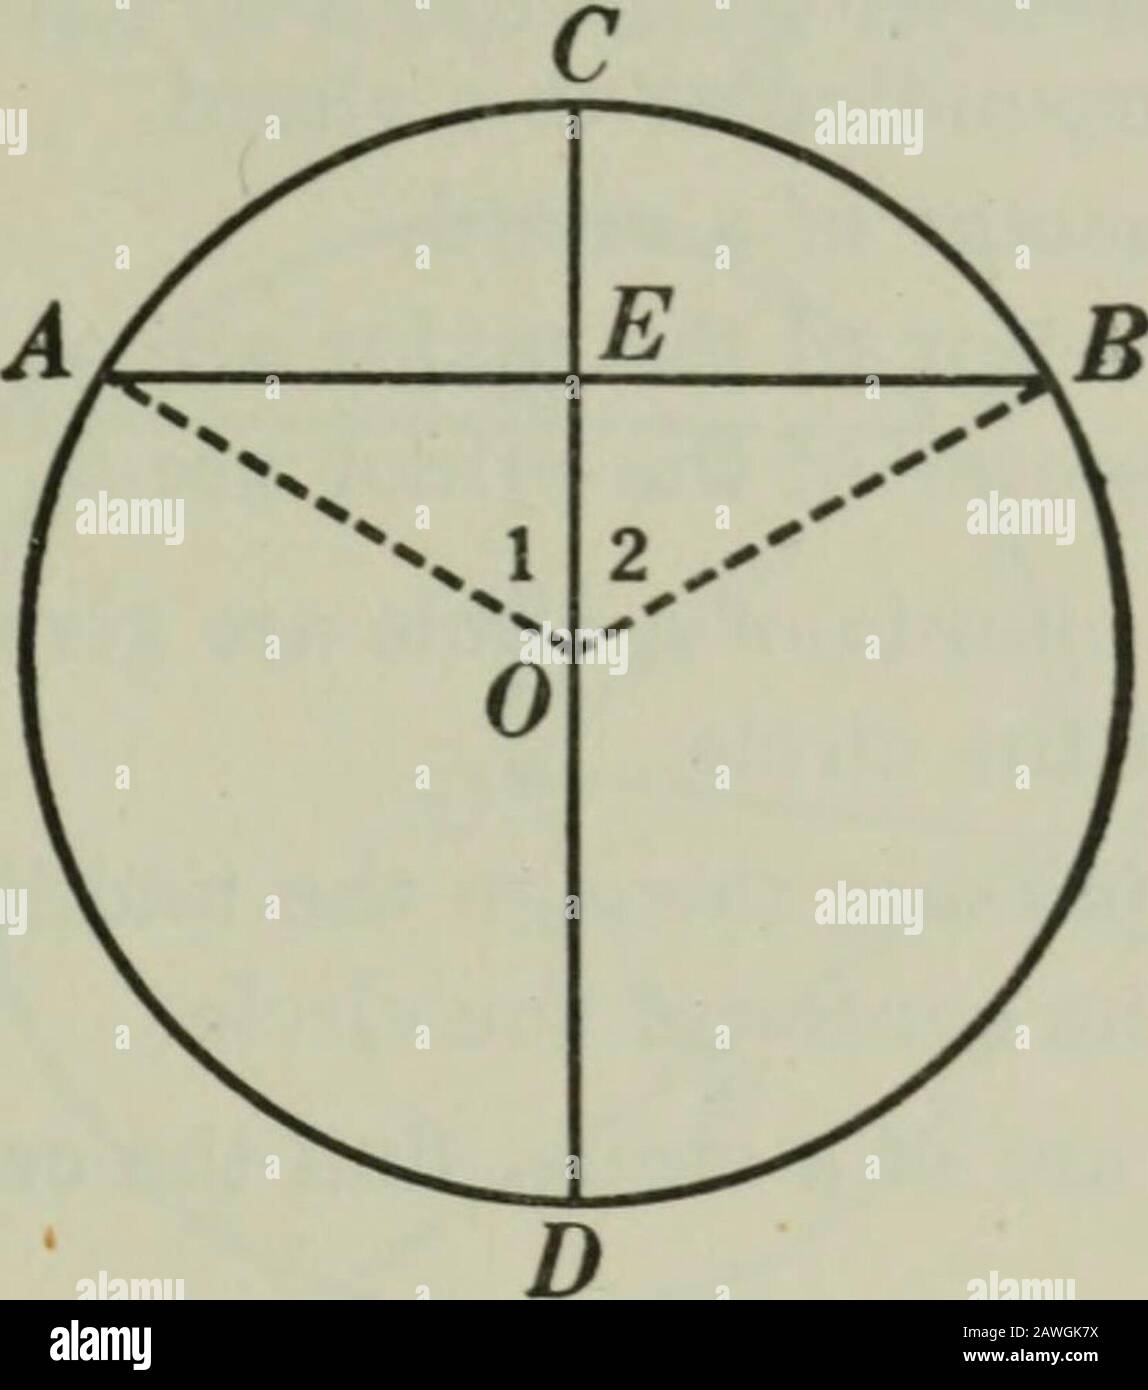 Plane and solid geometry . I. Given circle 0, with chord AB &gt; chord CD,To prove AB &gt; CB, Argument 1. Draw radii OA^ OB, OC, OD, 2. In A OAB and OCD, OA = OC, OB = OD. 3. Chord AB &gt; chord CD. 4. .-. Zl &gt; Z2, 5. , AB &gt; CD. Q.E.D. II. Conversely: Given circle 0, with AB &gt; CD.To prove chord AB &gt; chord CD. Reasoxs 1. § 54, 15. 2. § 279, a. 3. By hyp. 4. § 173. 5. § 294. Argument 1. Draw radii OA, OB, OC, OD. 2. In A OAB and OCD, OA = OC, OB = OD. 3. AB &gt; CD. 4. .-. Zl &gt; Z 2. 5. .-. chord AB &gt; chord CD. q.e.d. Ex. 422. Prove the converse of Prop. IV by the indirect met Stock Photo